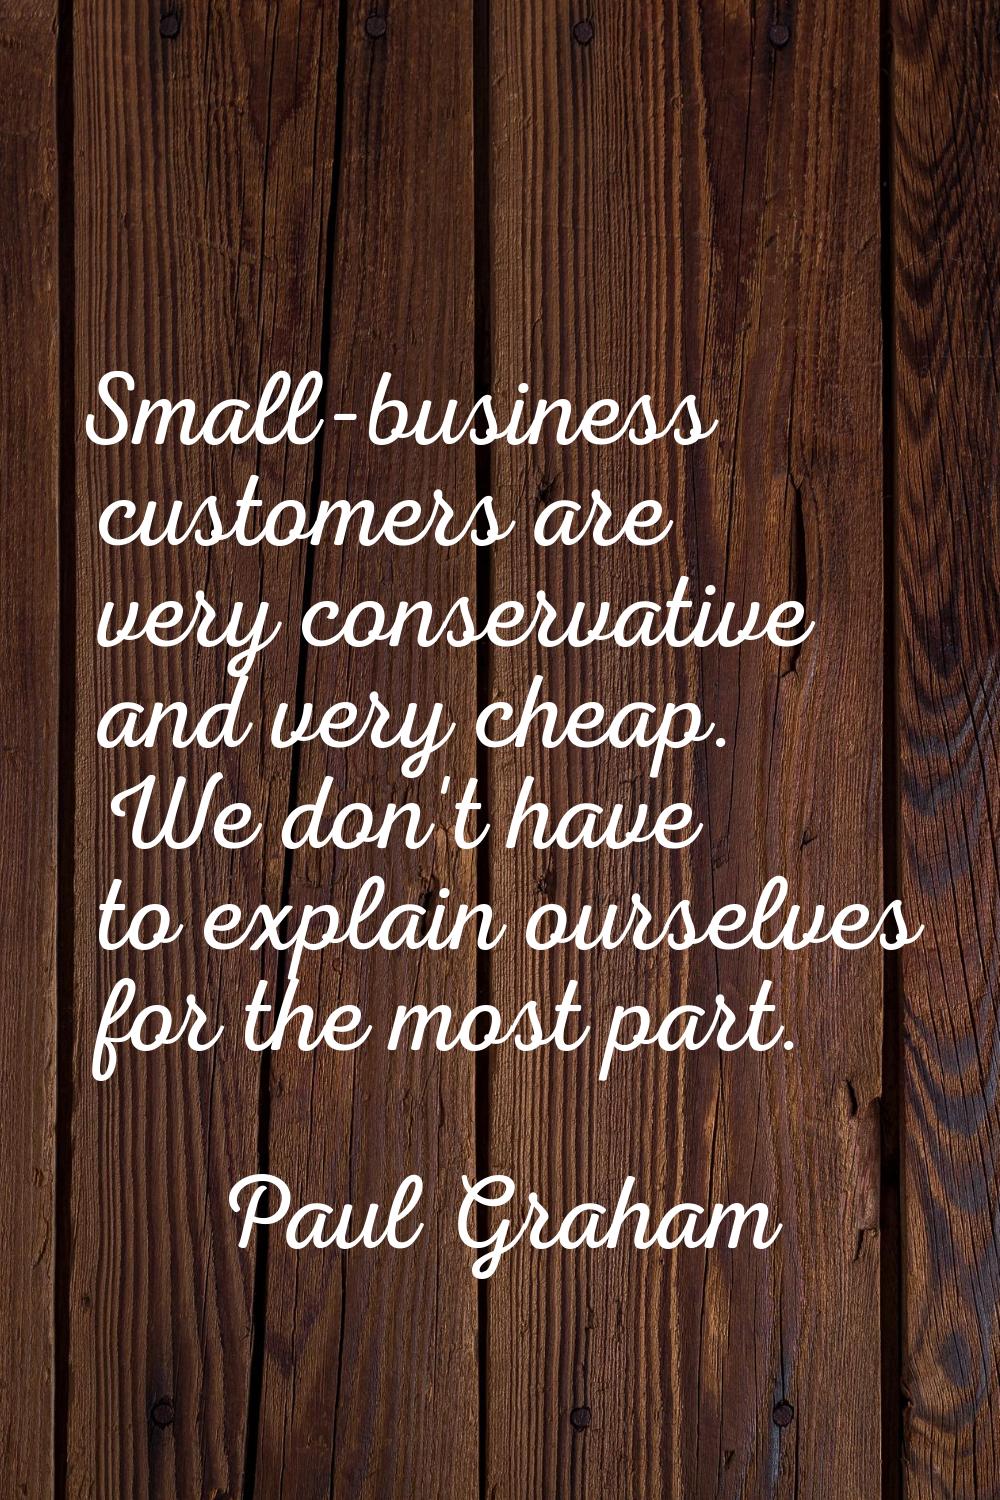 Small-business customers are very conservative and very cheap. We don't have to explain ourselves f